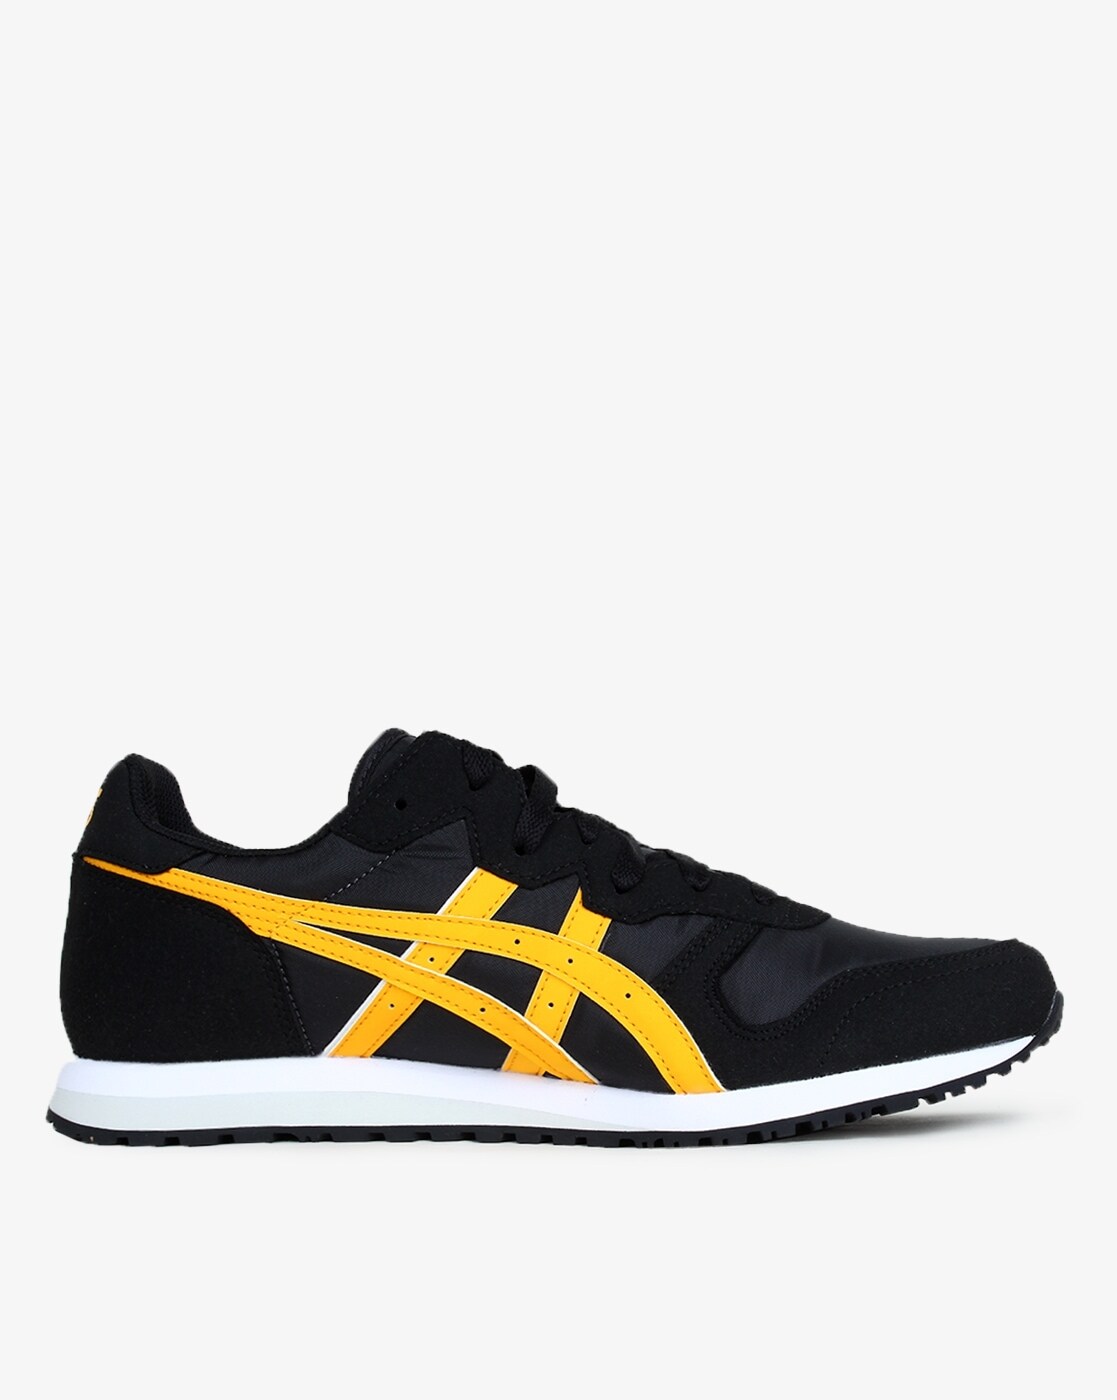 asics casual shoes online india